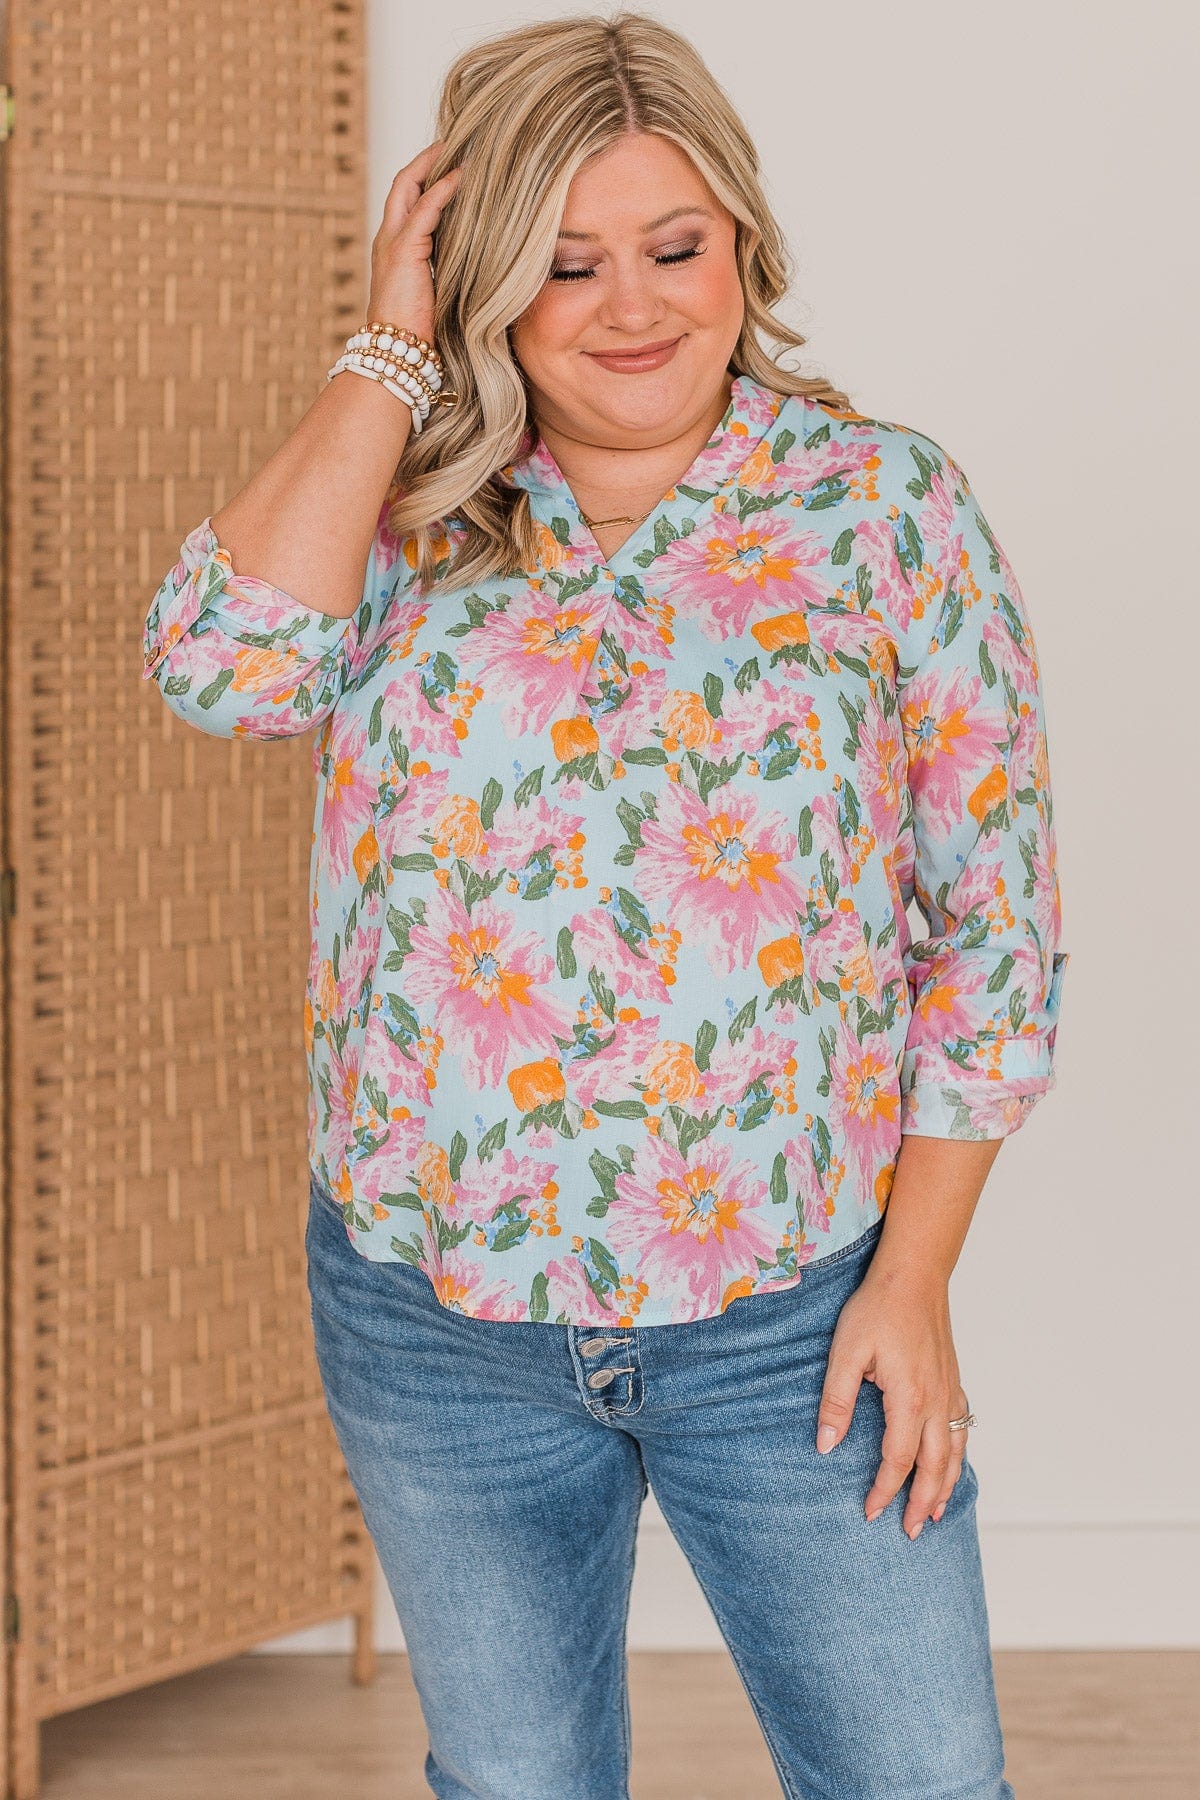 Calling My Name Floral Blouse- Light Blue & Pink